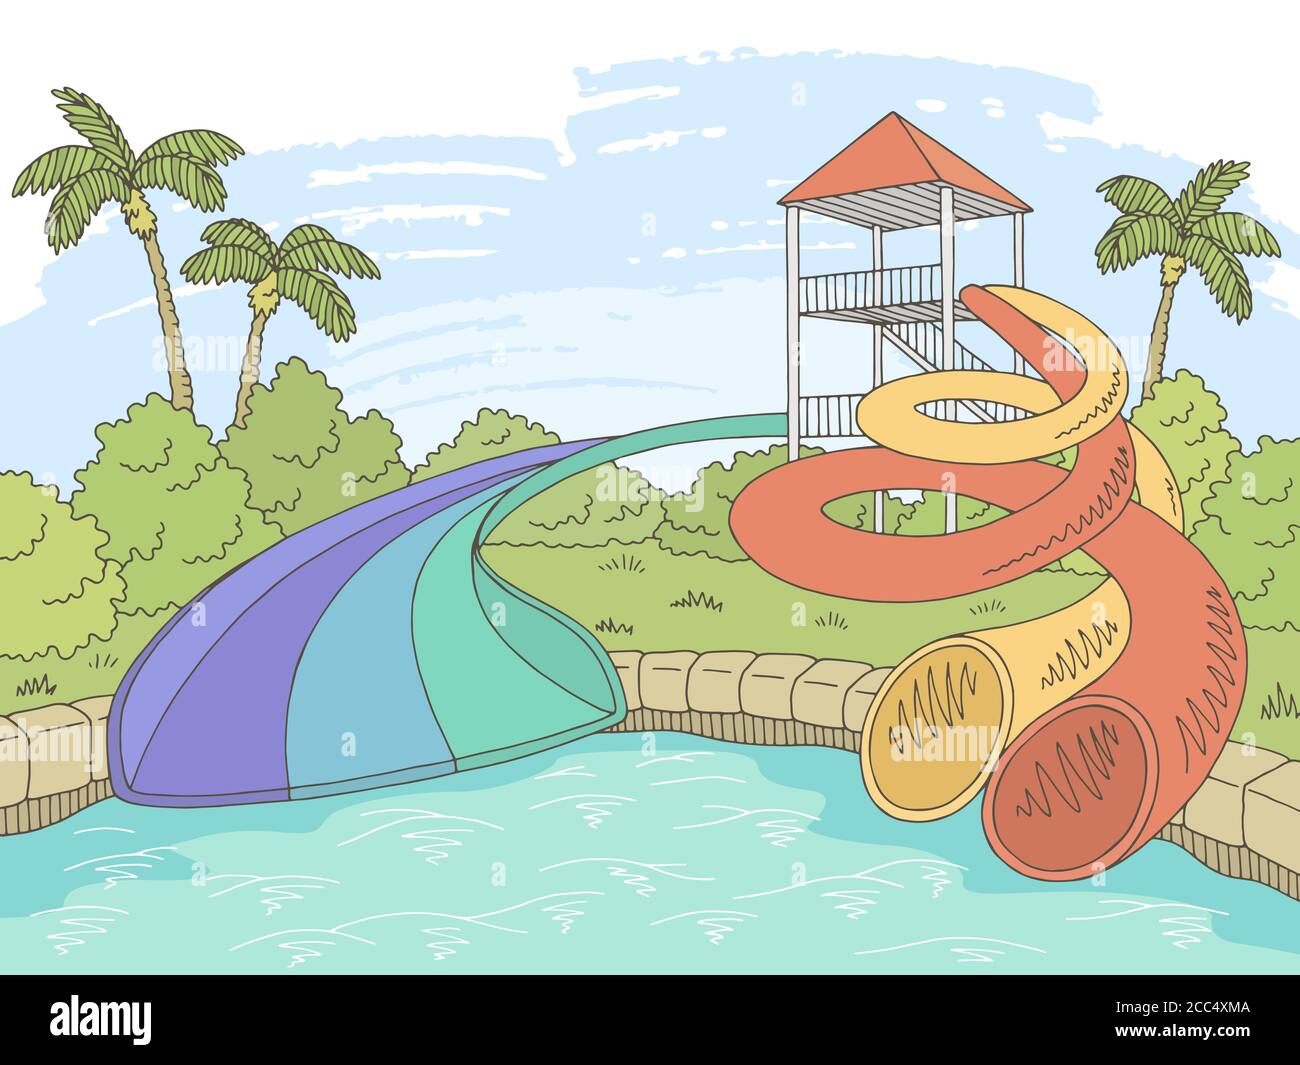 100,000 Drawing water park Vector Images | Depositphotos